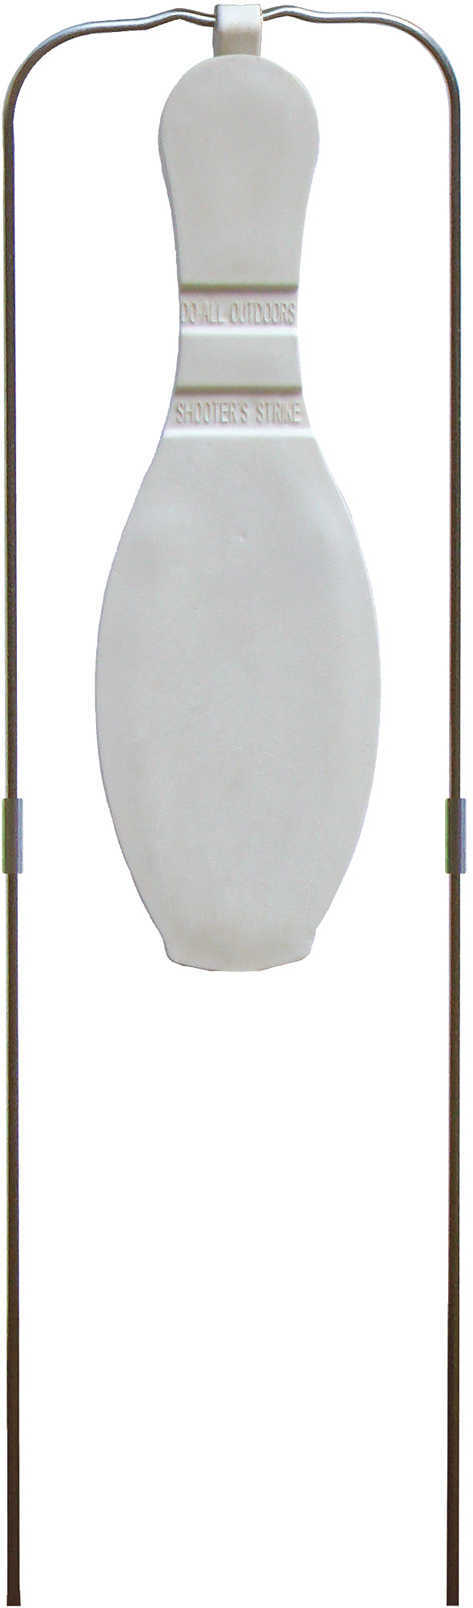 Do All Traps BSP1 Impact Seal Bowling Pin 11" White w/Stand